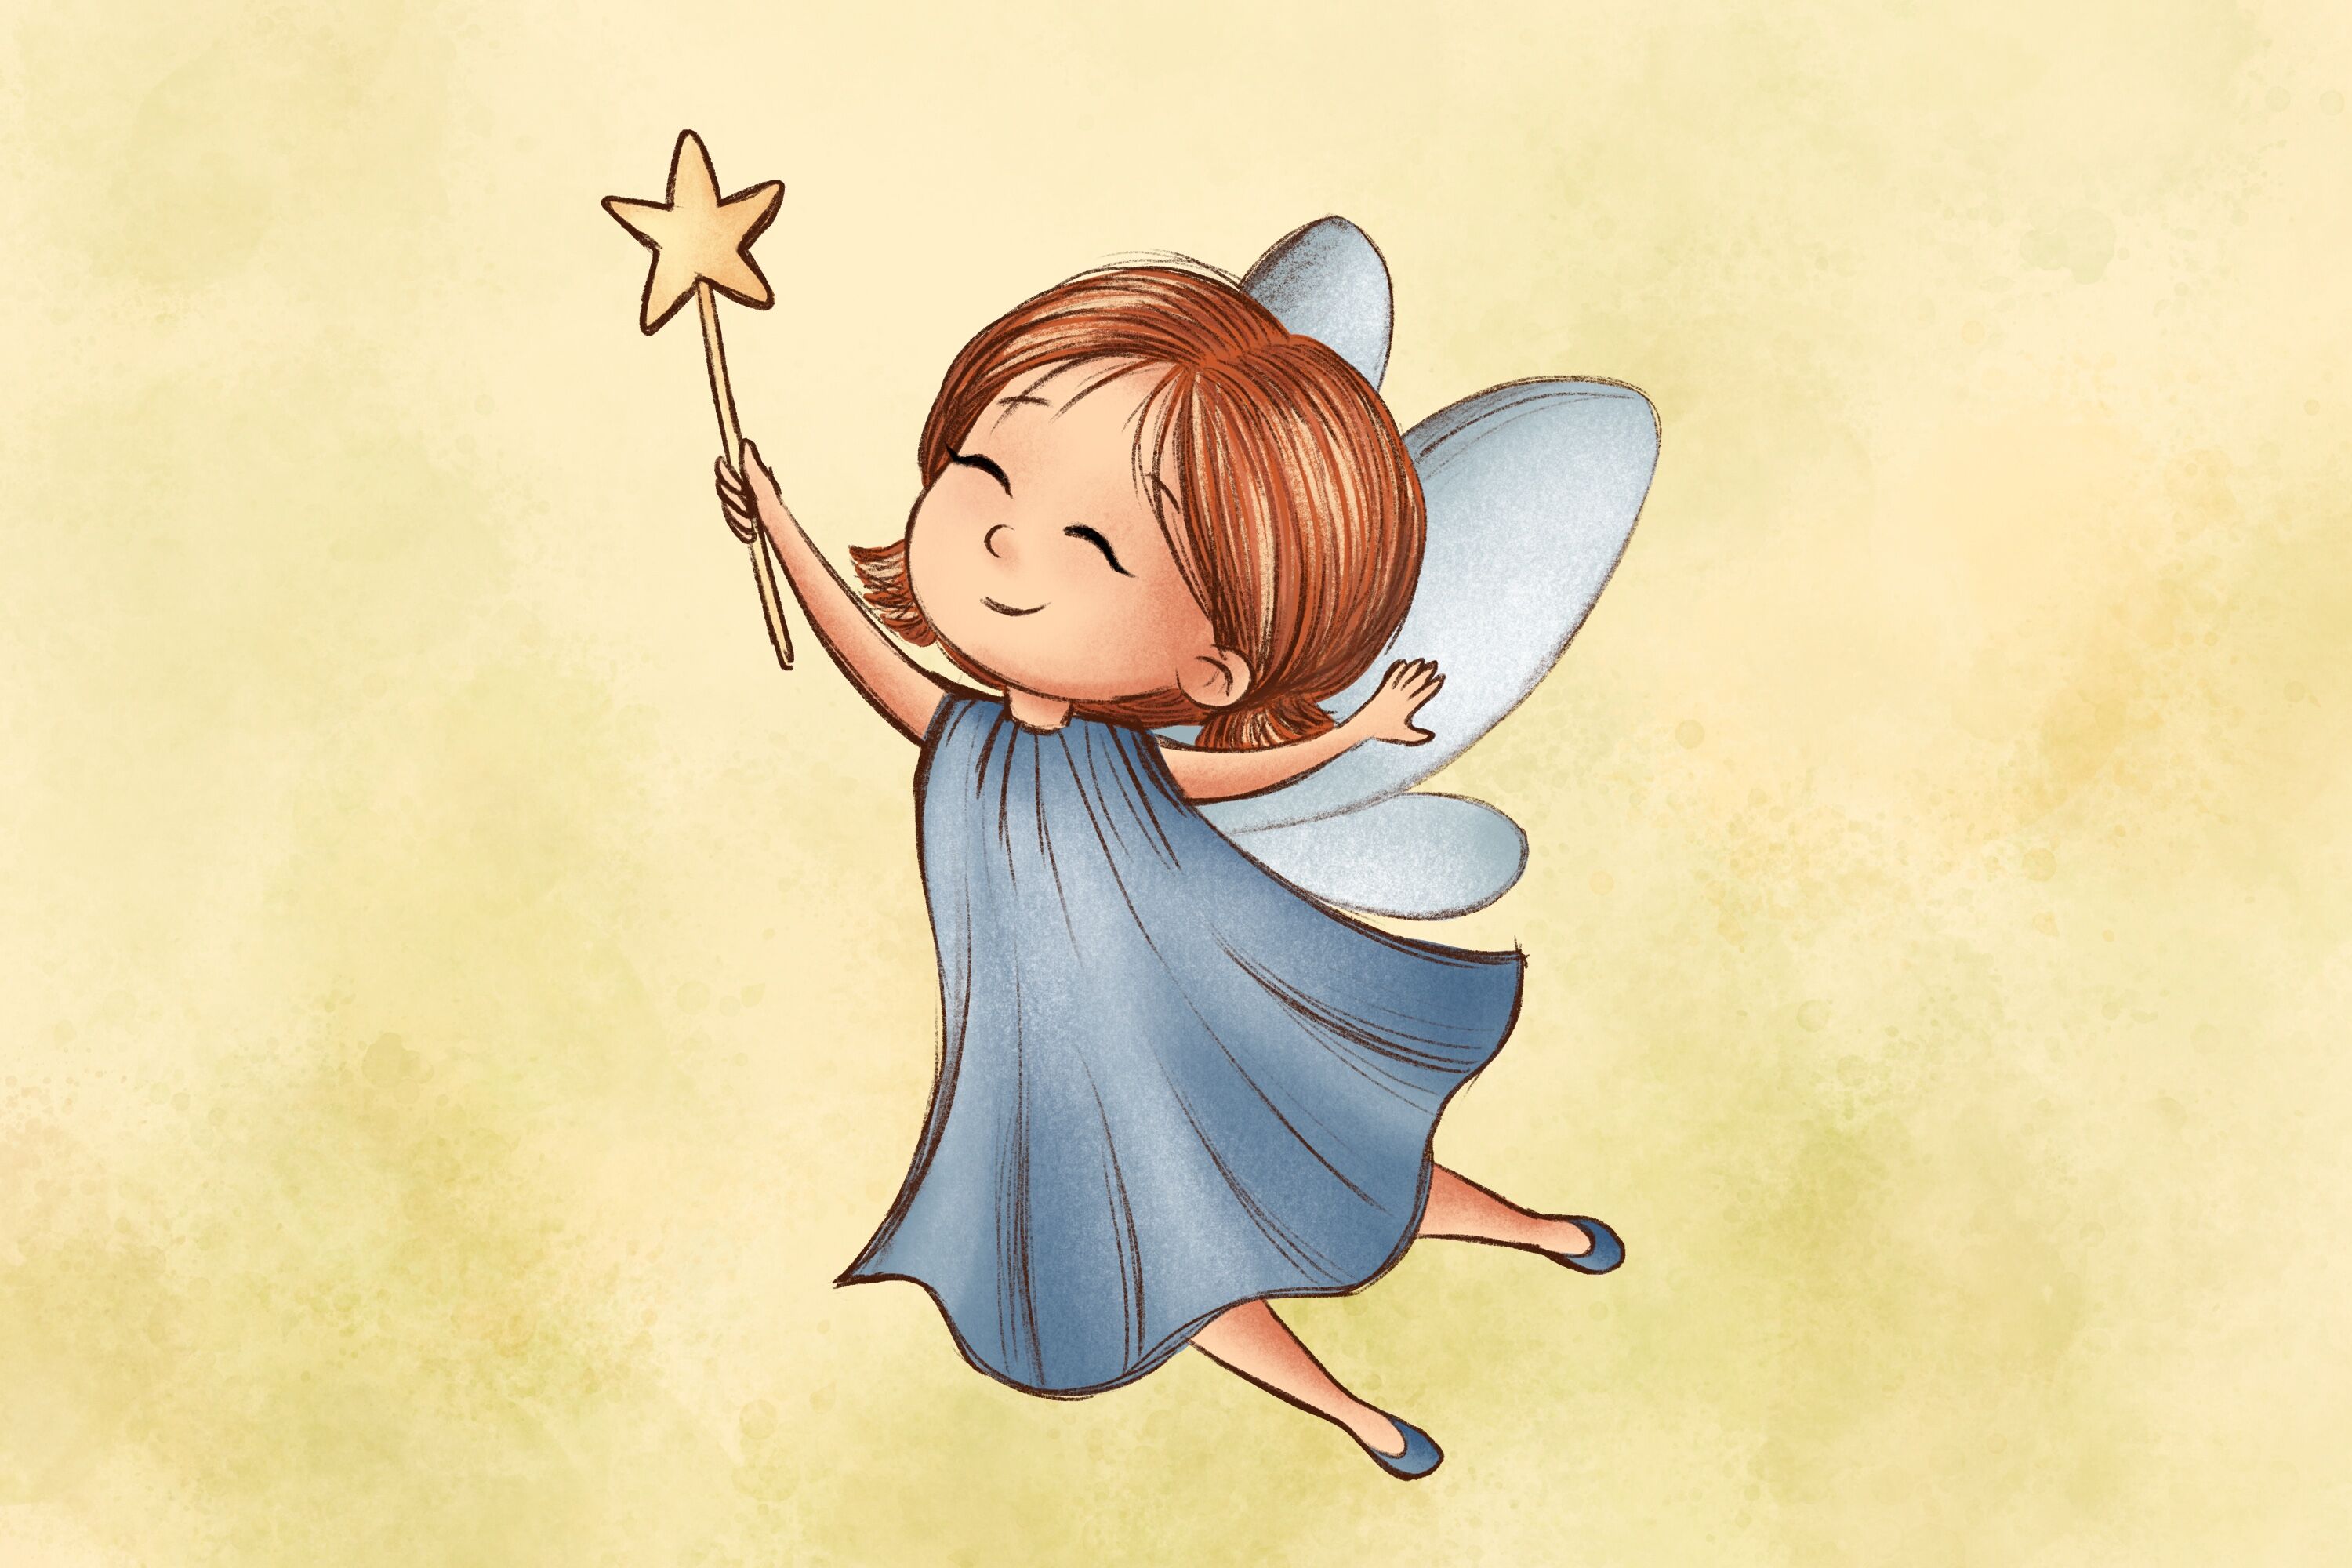 A girl with wings and a blue dress on holding a wand with a star on it. 